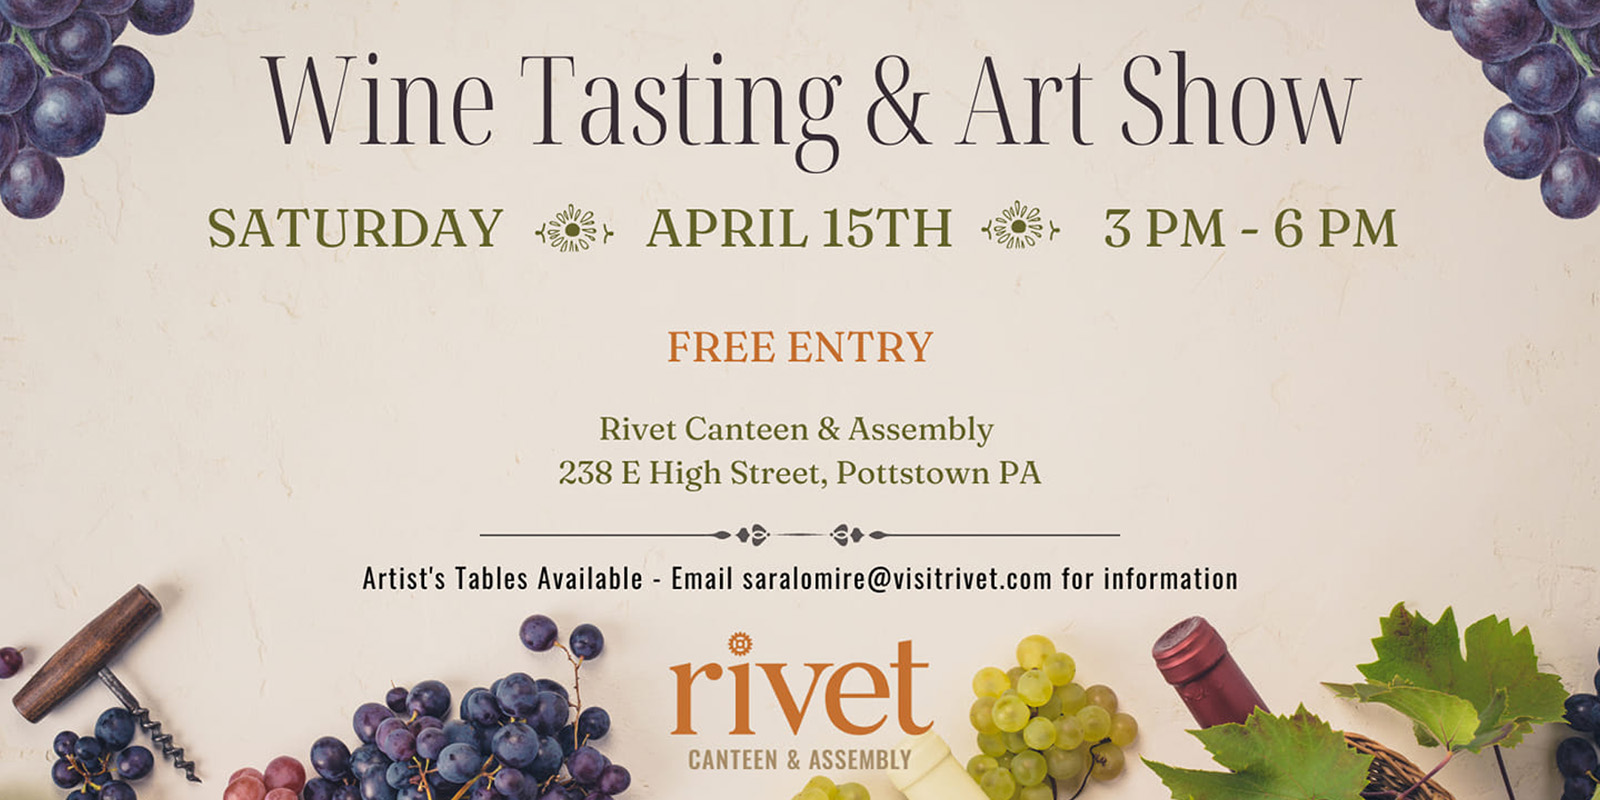 Join us at Rivet: Canteen & Assembly on Saturday, April 15th, for an evening of wine tasting and art show. Experience a variety of exquisite wines while appreciating artwork from talented local artists.